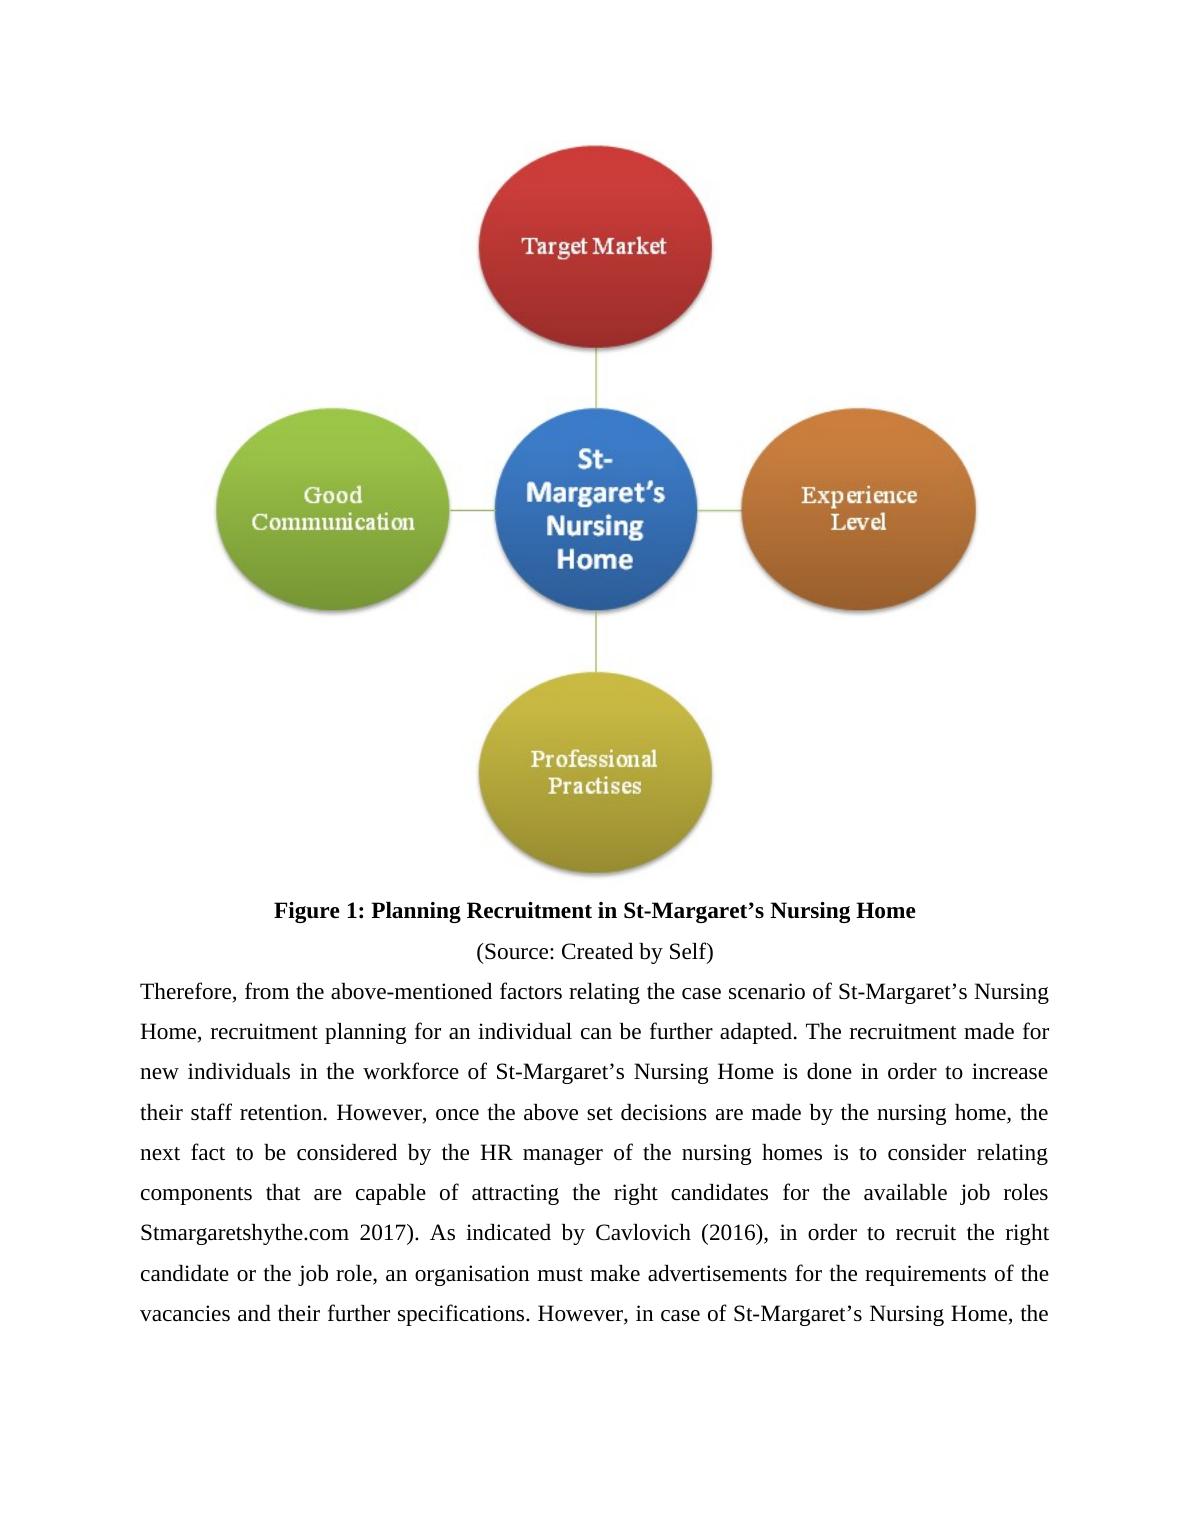 Managing Human Resources in Health & Social Care : Report_4